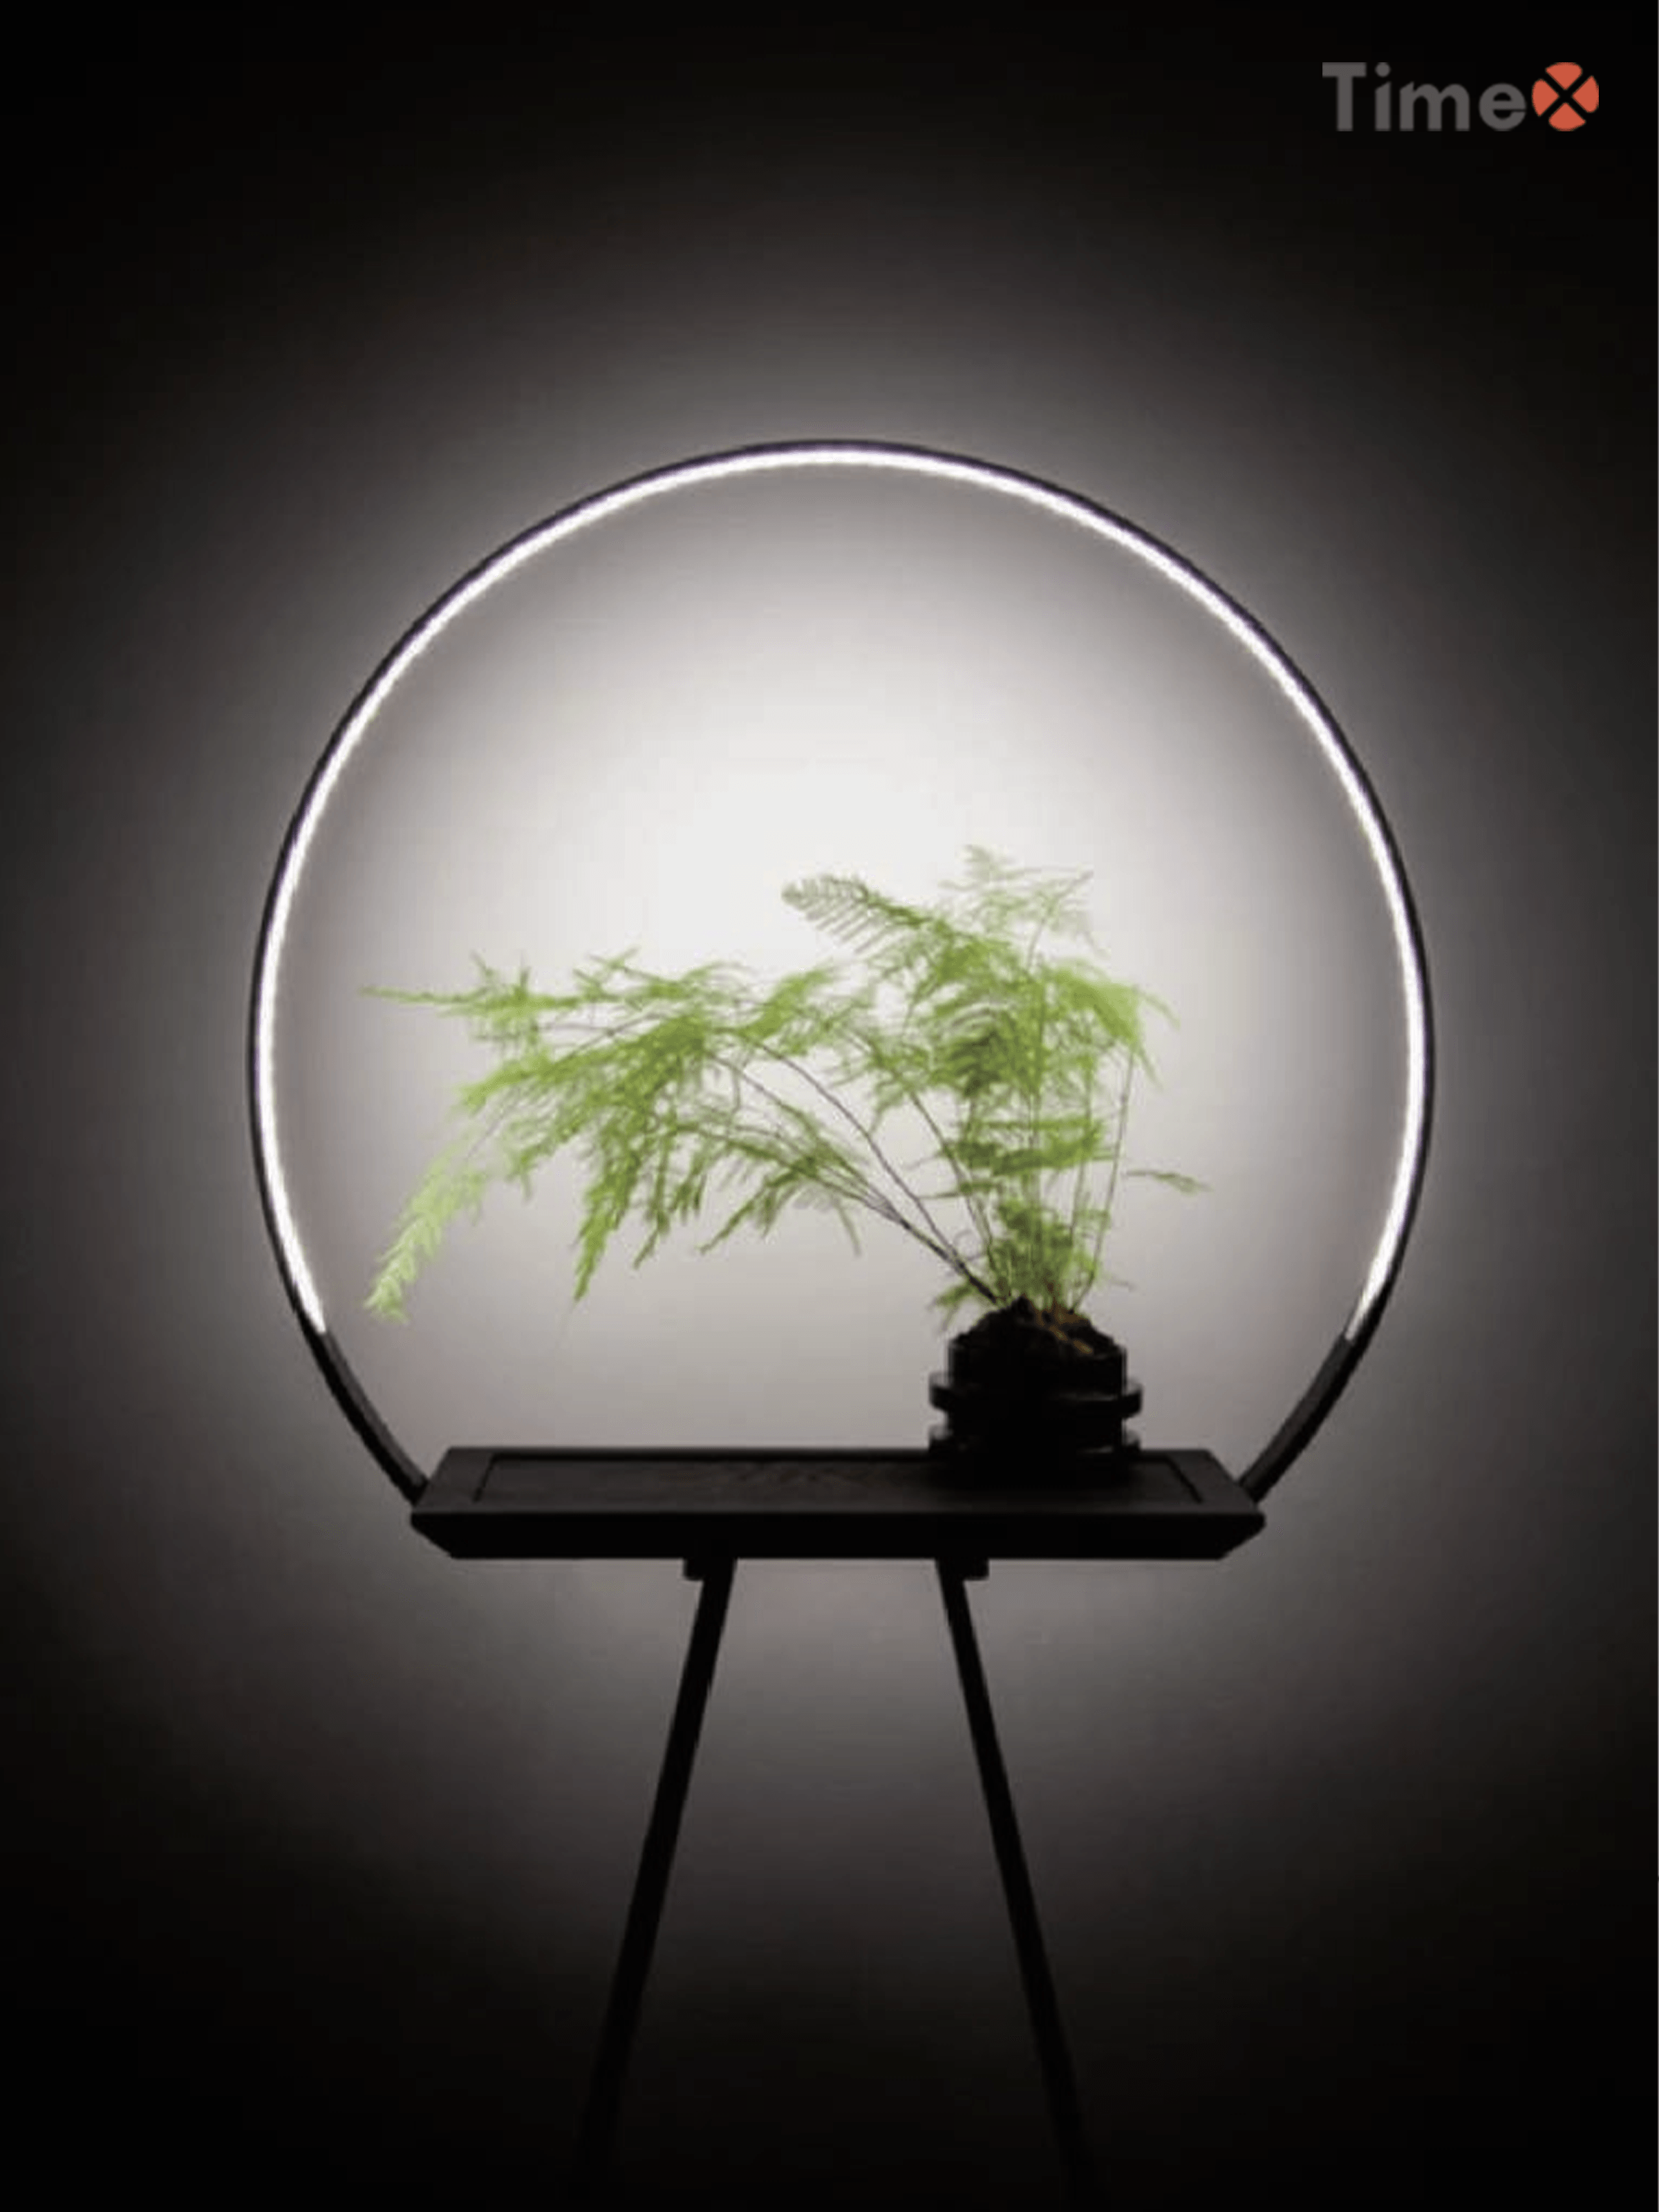 Indoor metal lamps that help plant growth